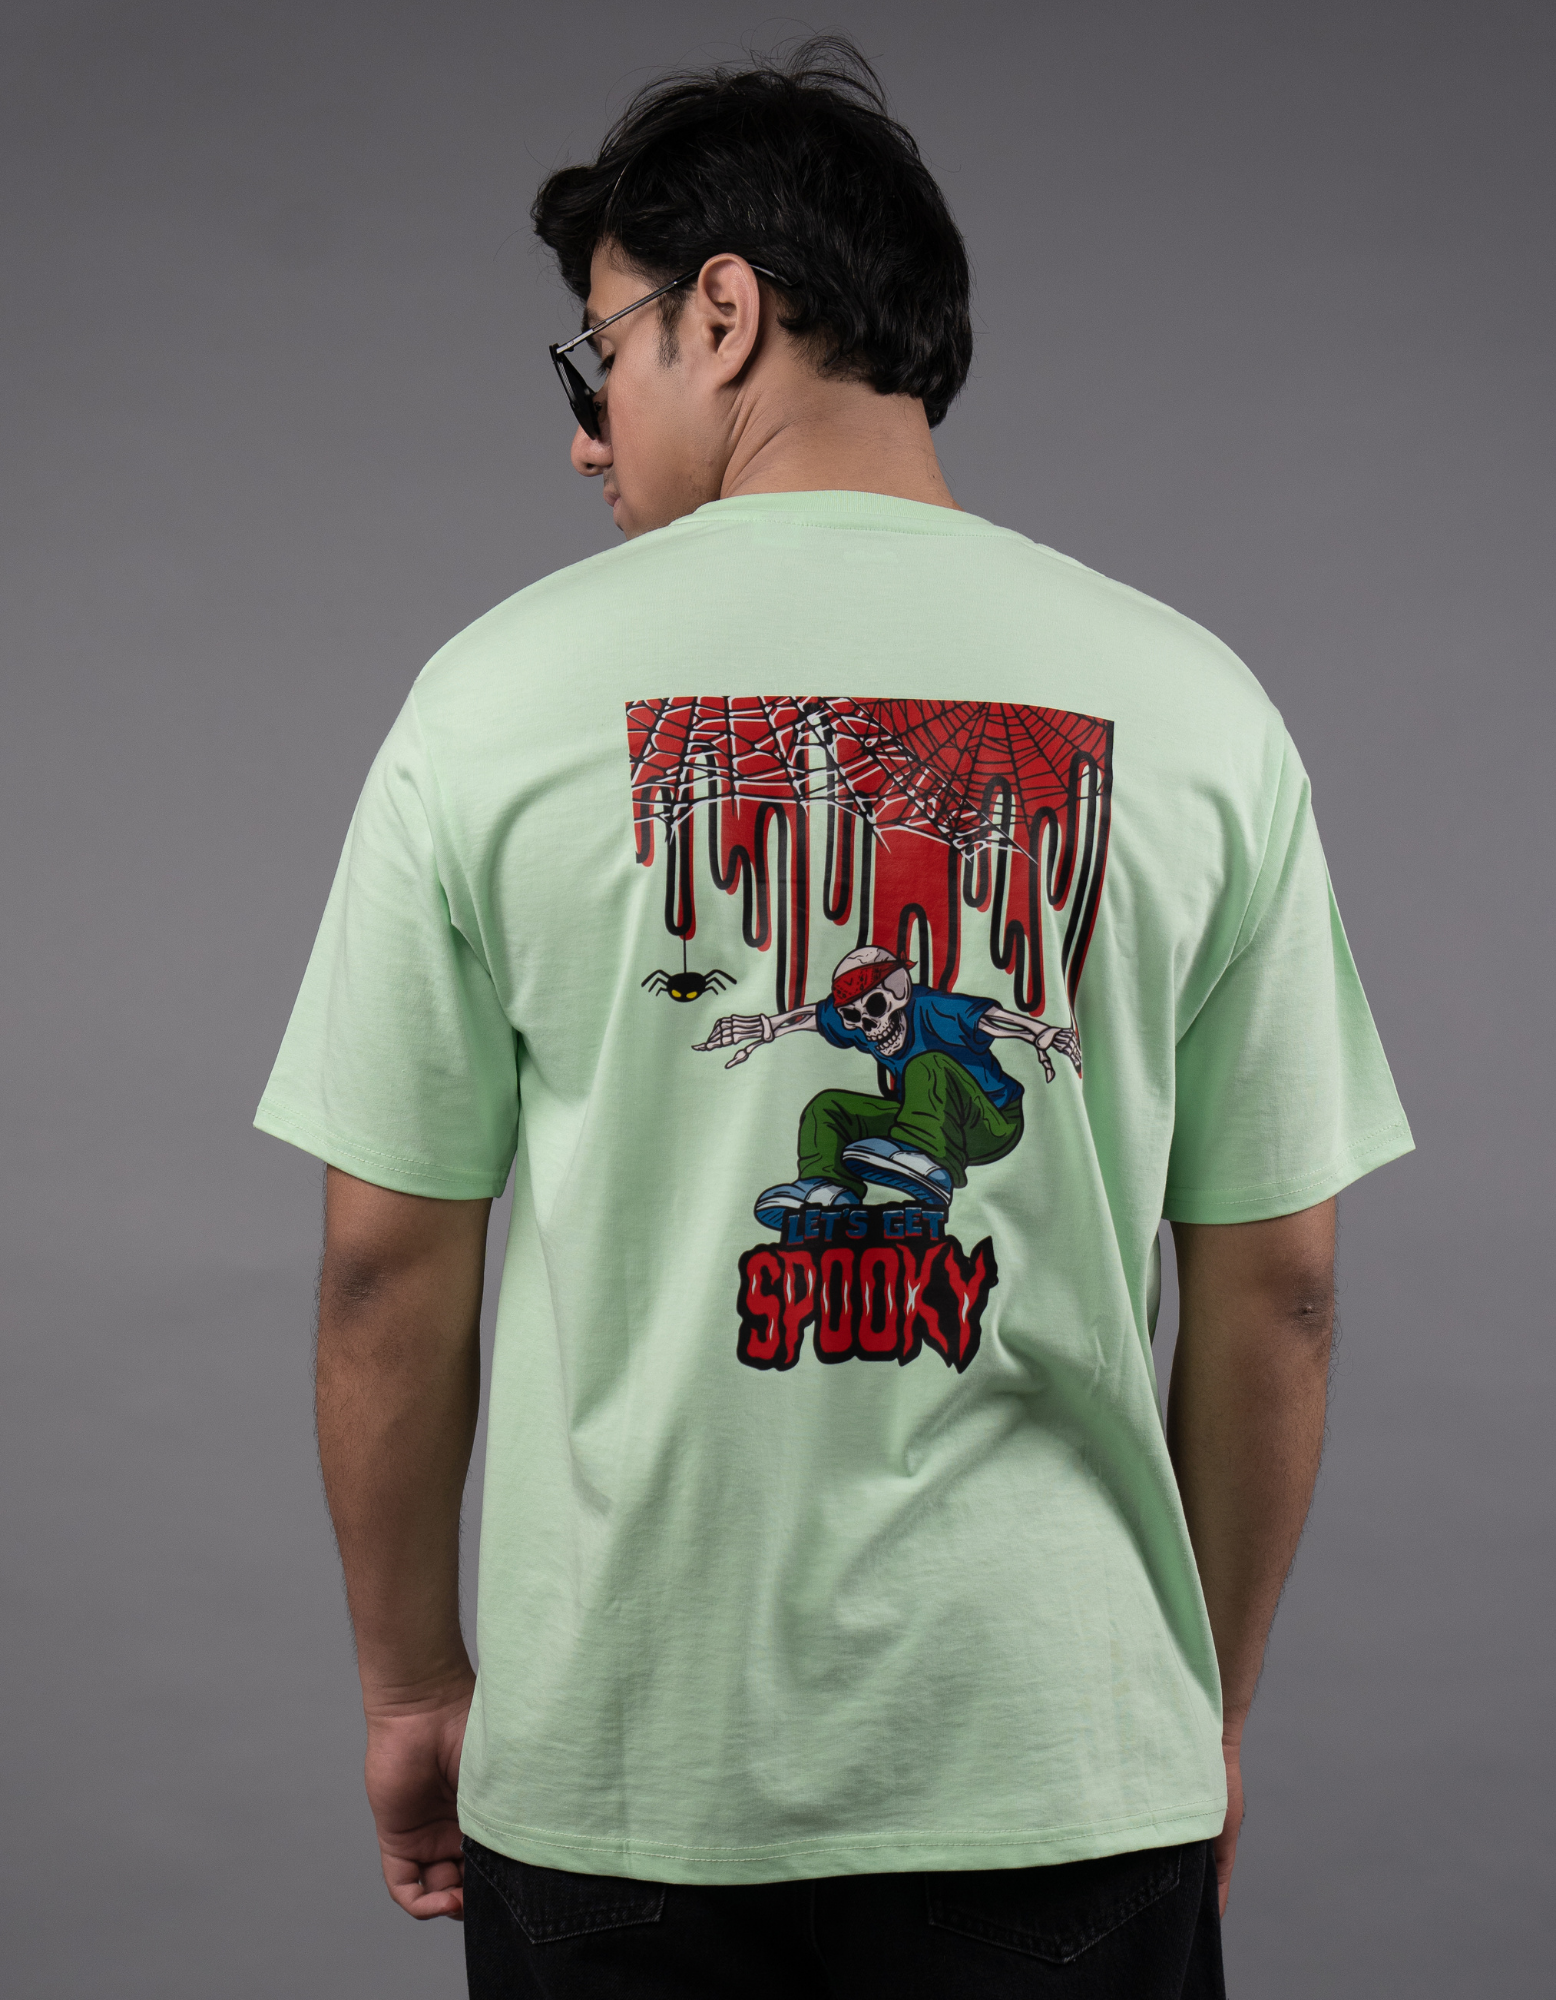 Spooky Graphic Printed Men’s Oversized T-shirt